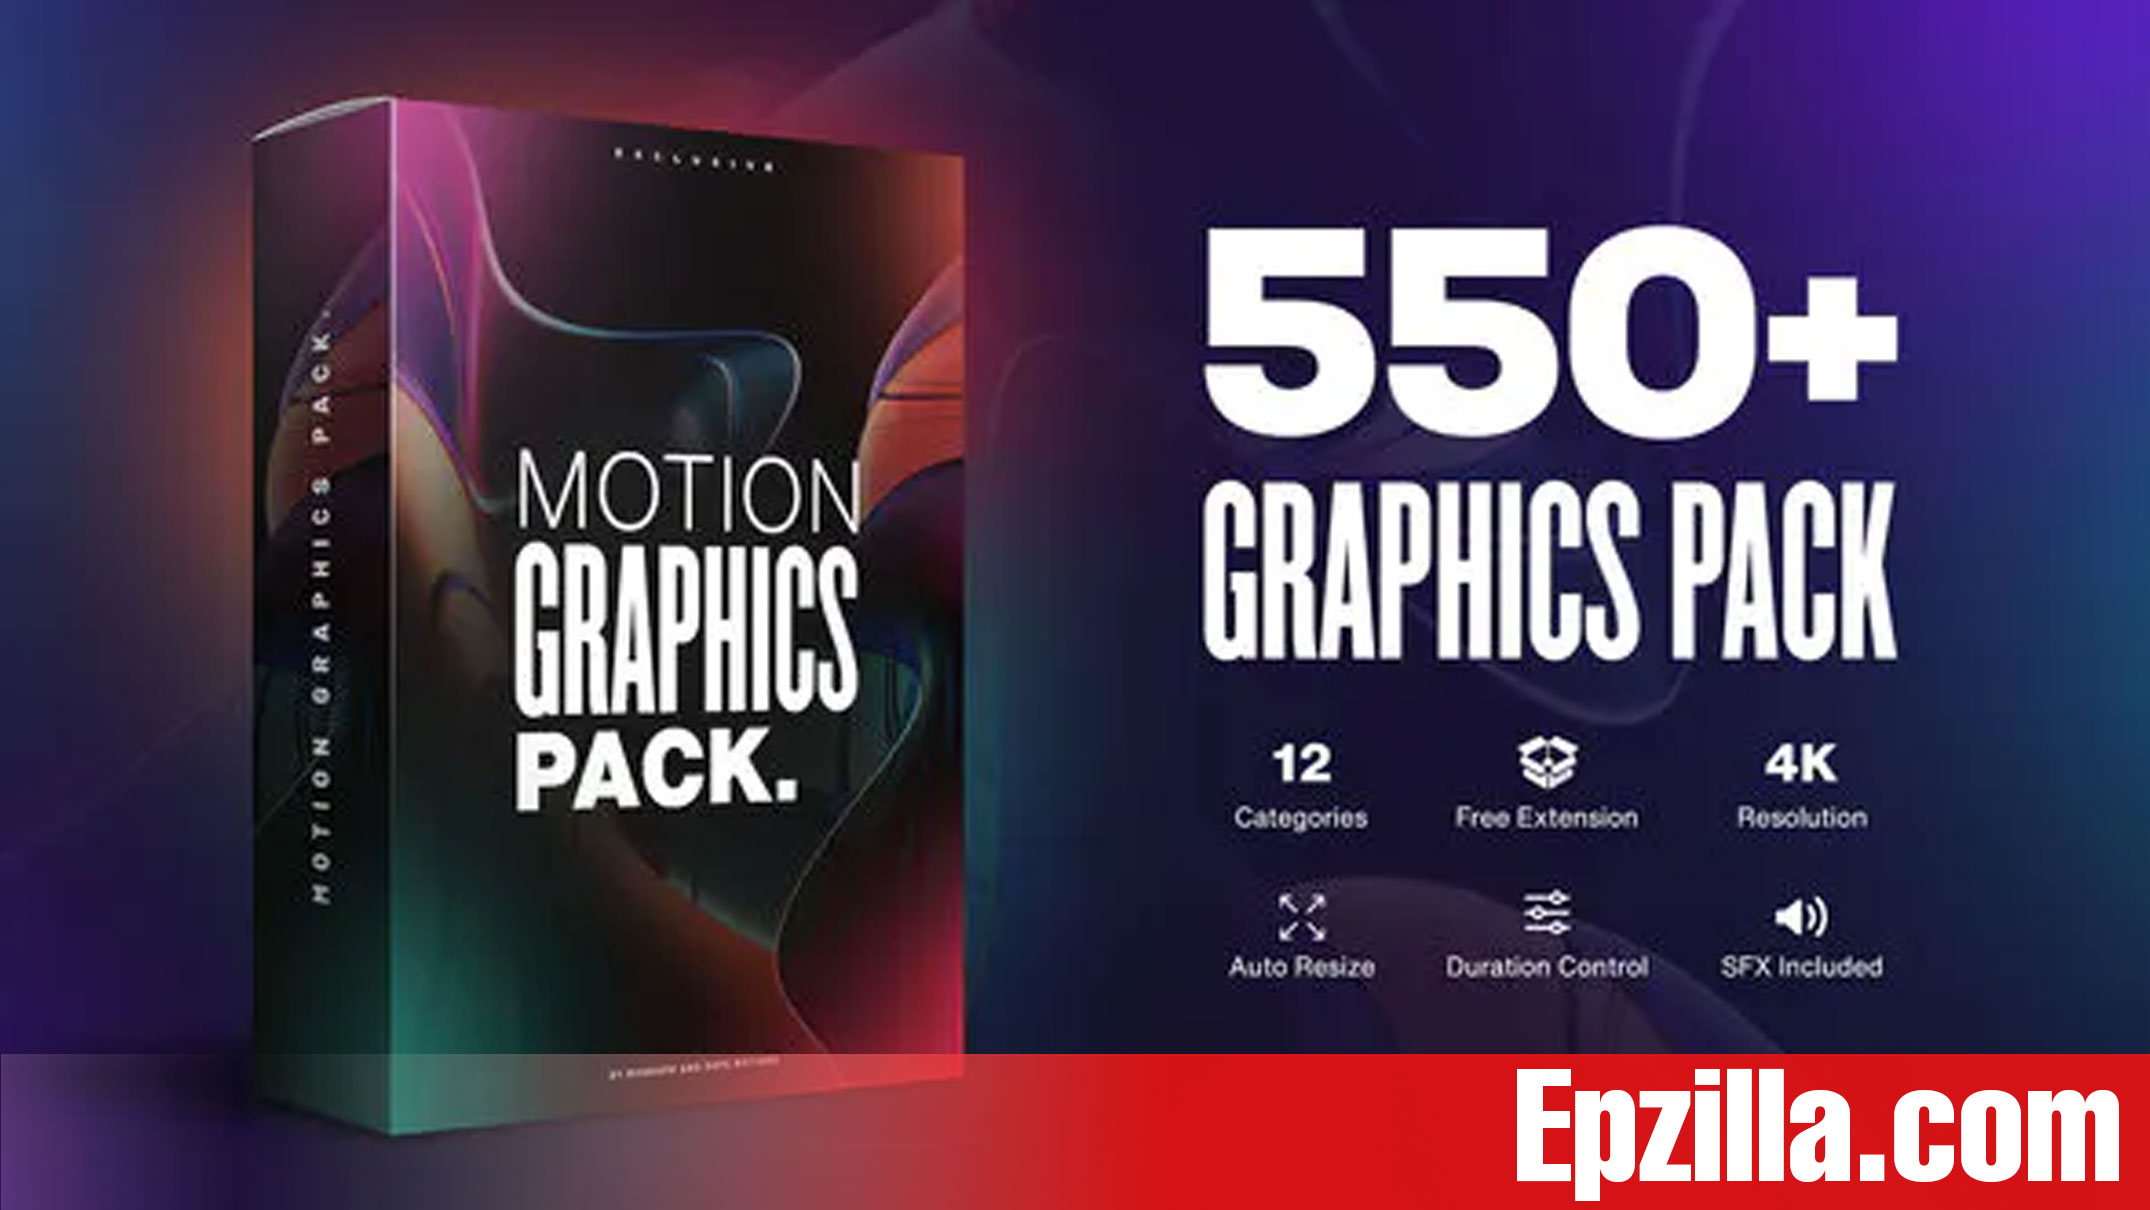 Videohive AtomX Motion Graphics Pack 550+ Animations Pack 23678923 Free Download From Epzilla.com.jpg